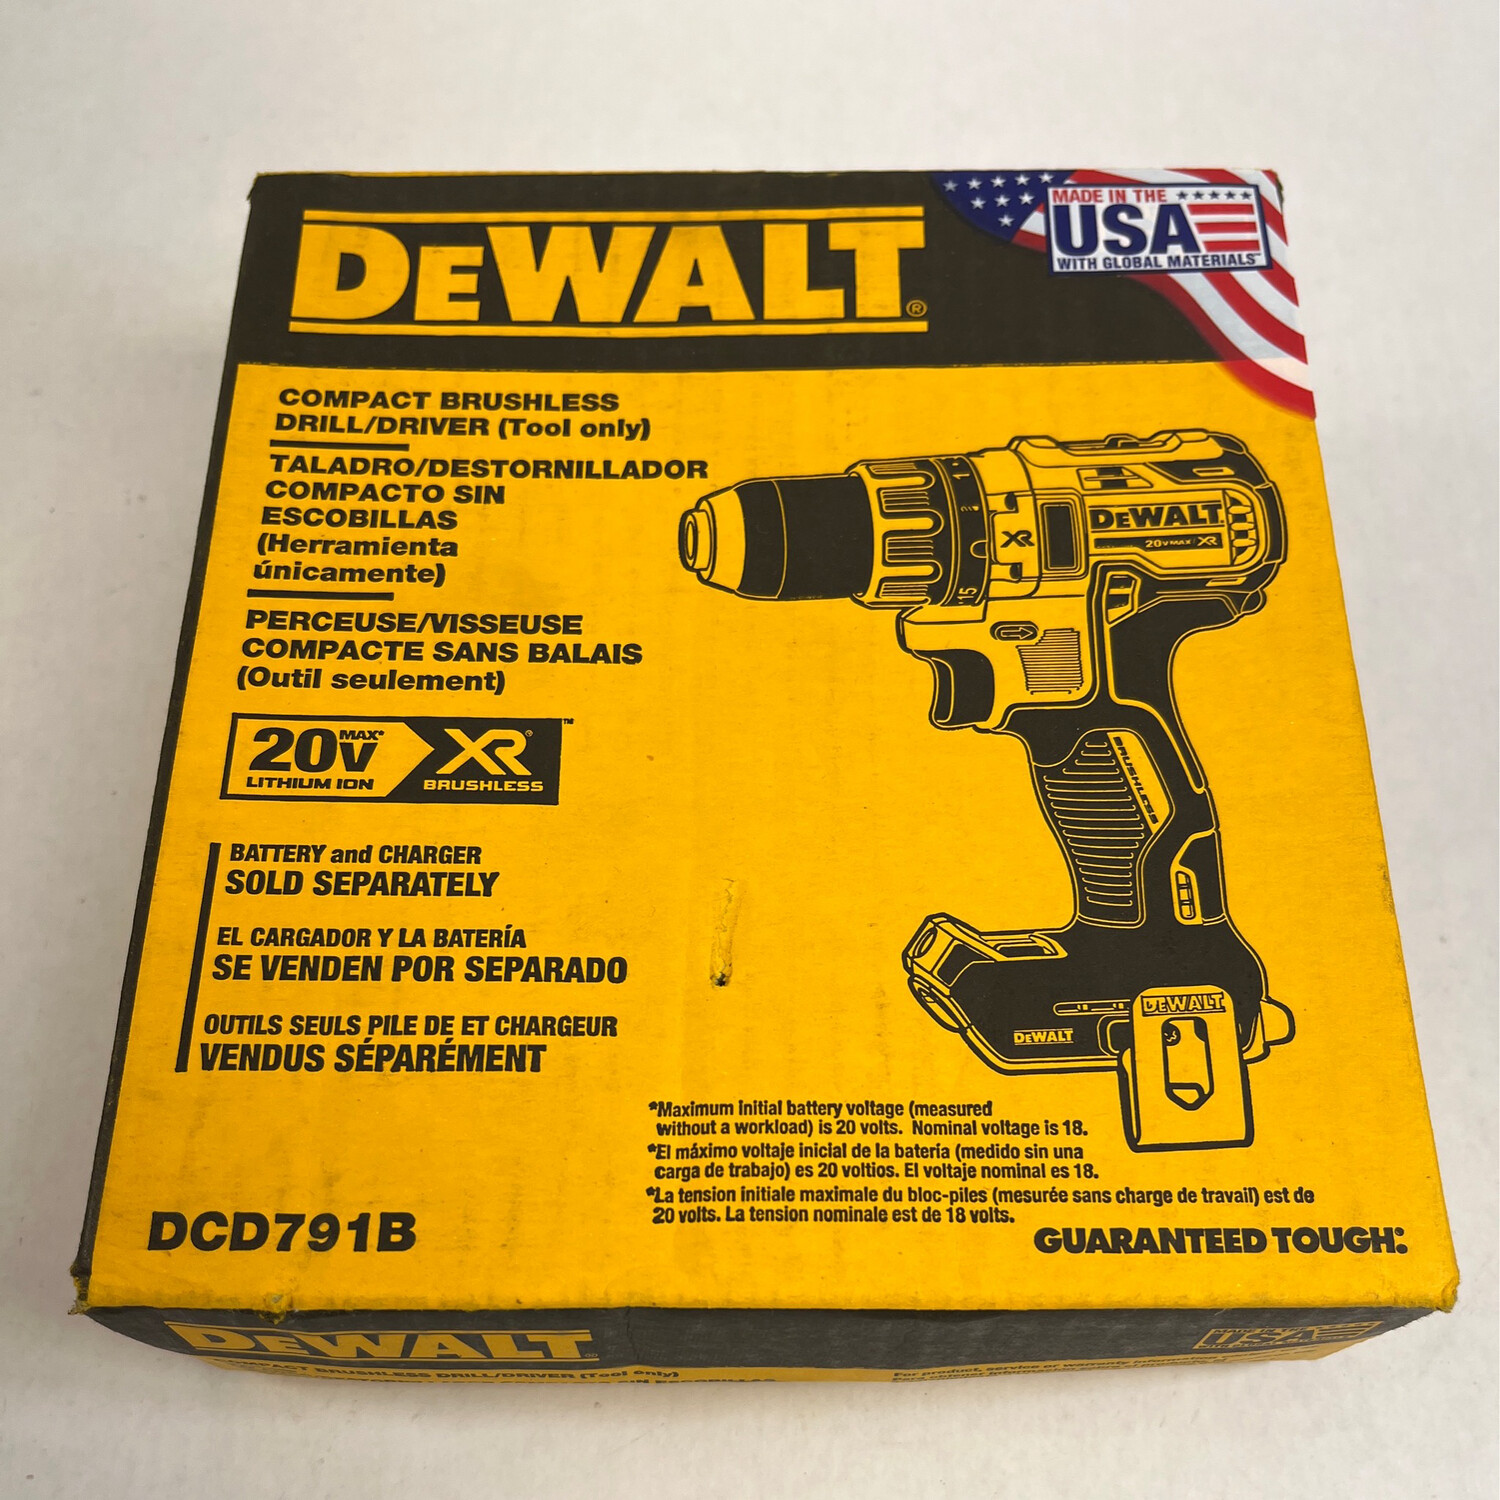 Dewalt Compact Brushless Drill/Driver (Tool Only) DCD791B